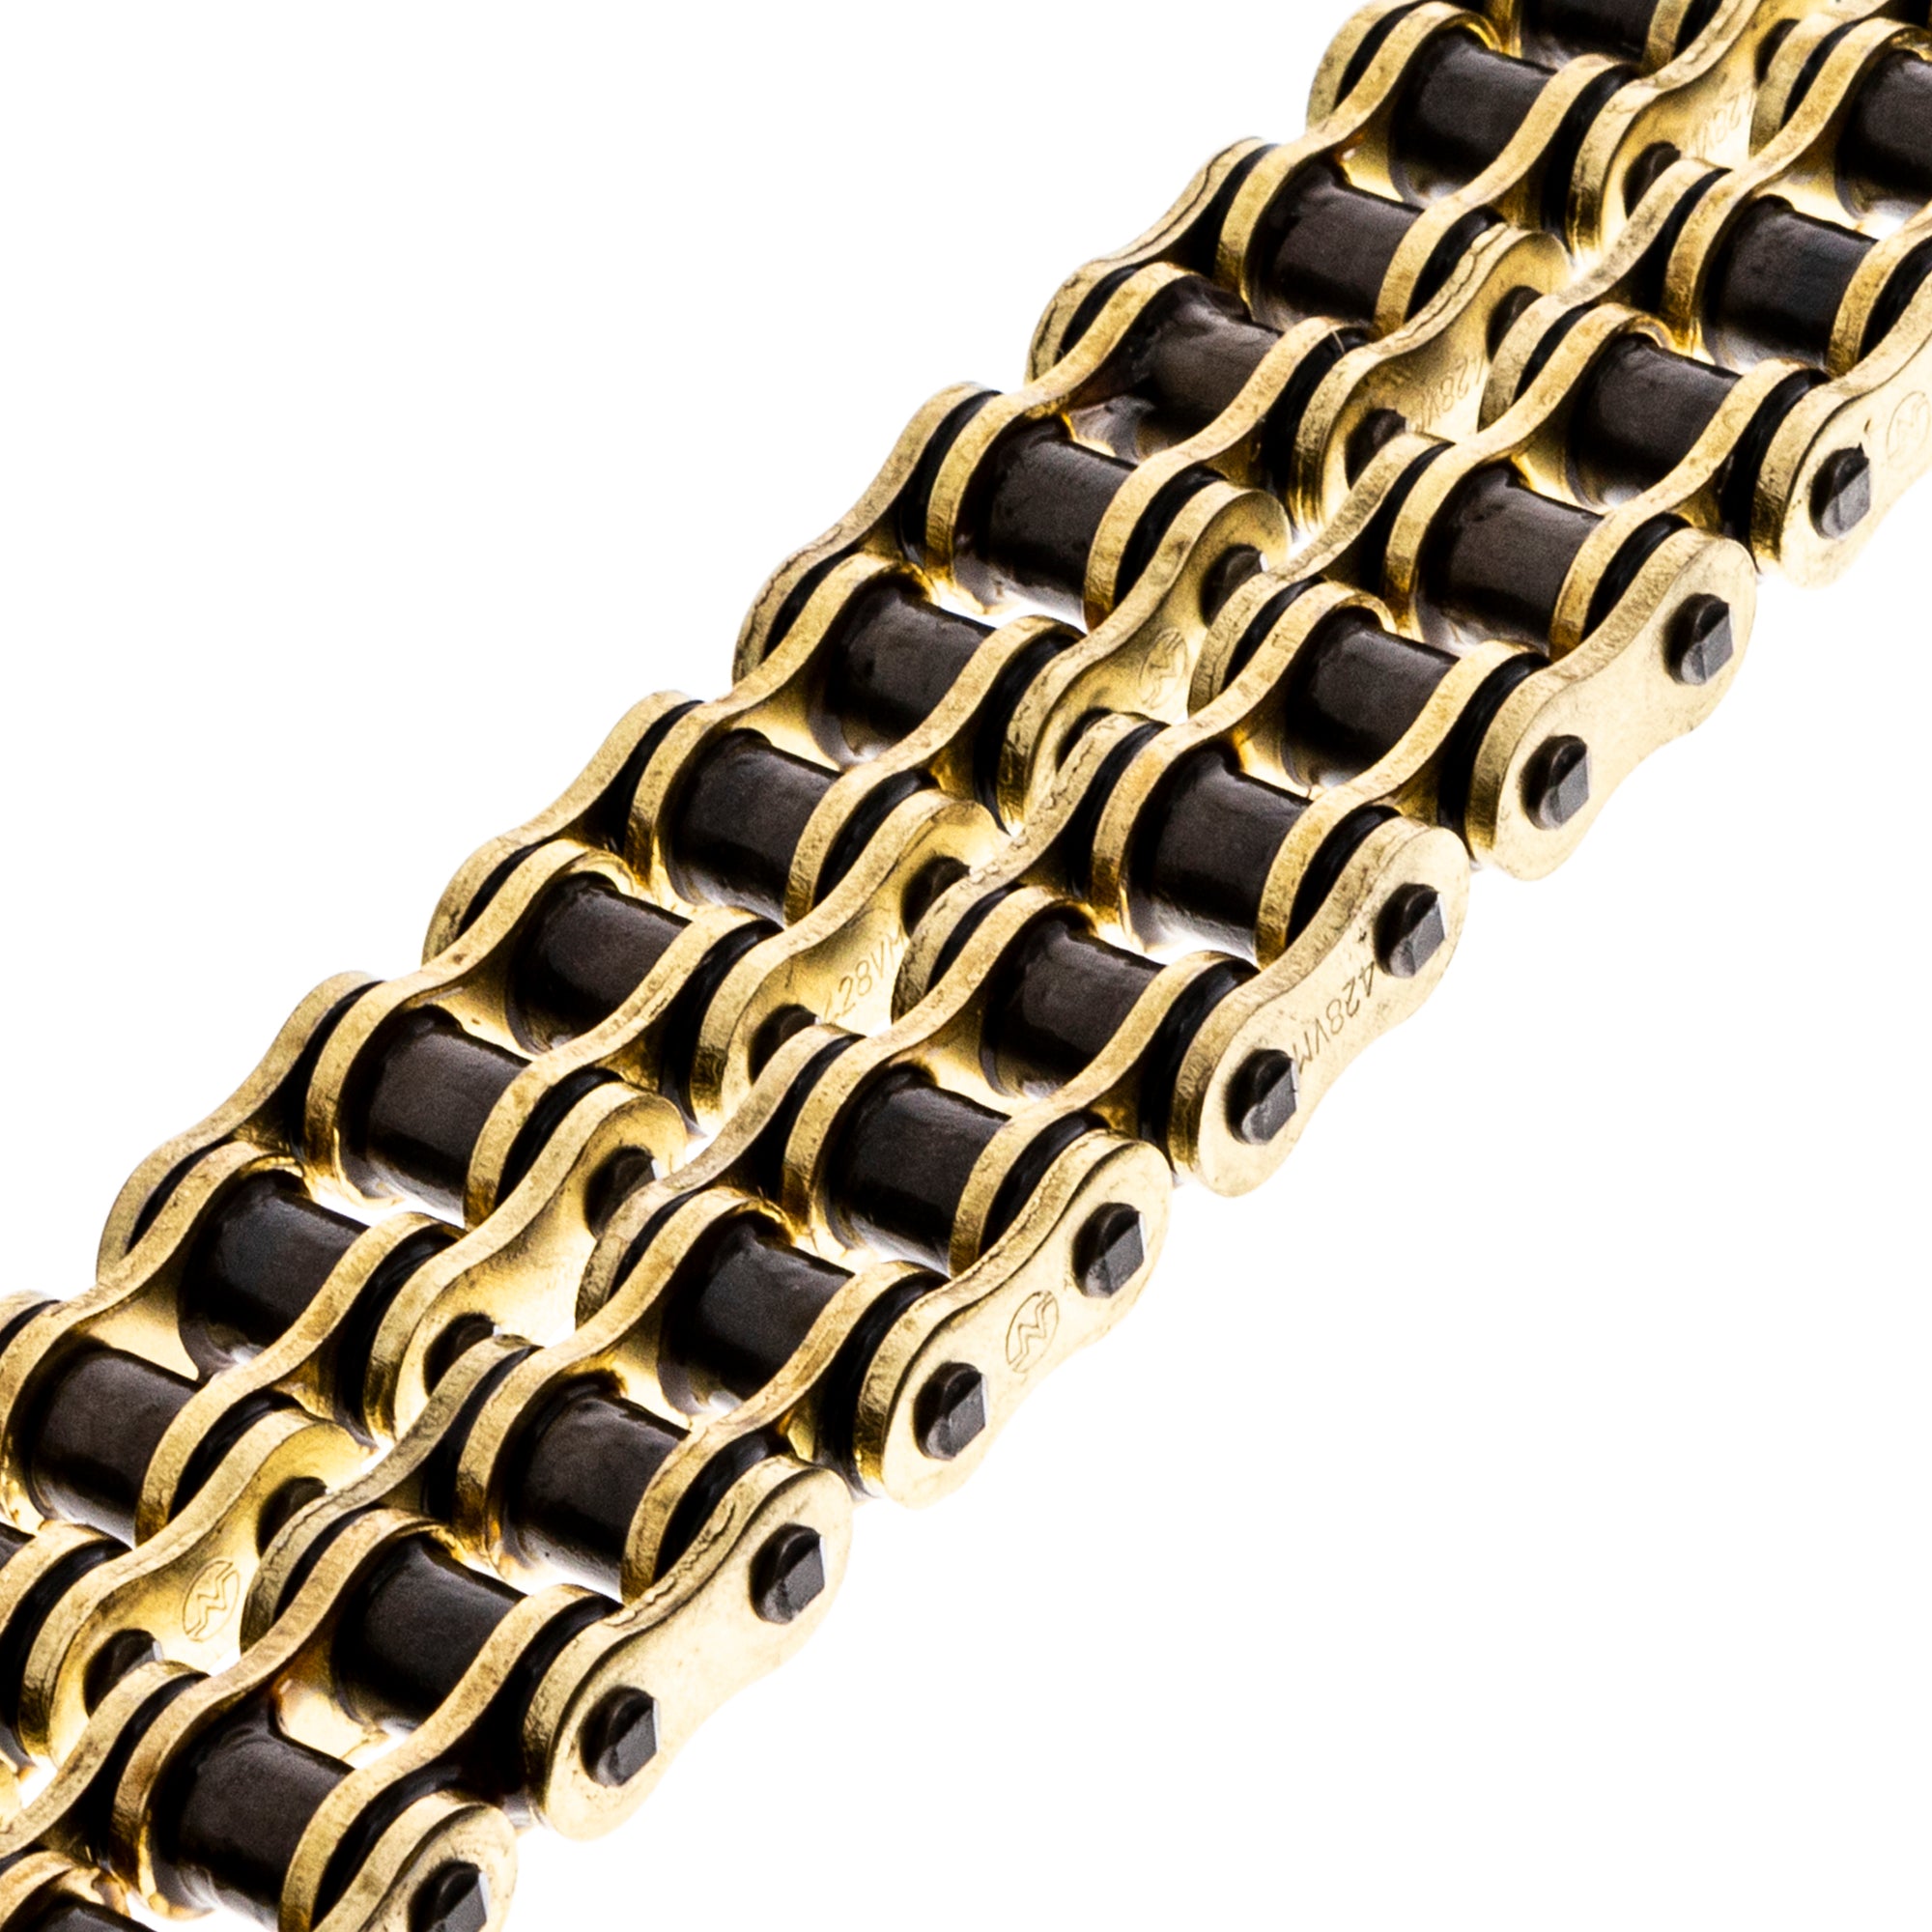 Gold X-Ring Chain 124 w/ Master Link for zOTHER YZ85 XR185 XL125S TS100 5413 47010165124 NICHE 519-CDC2524H